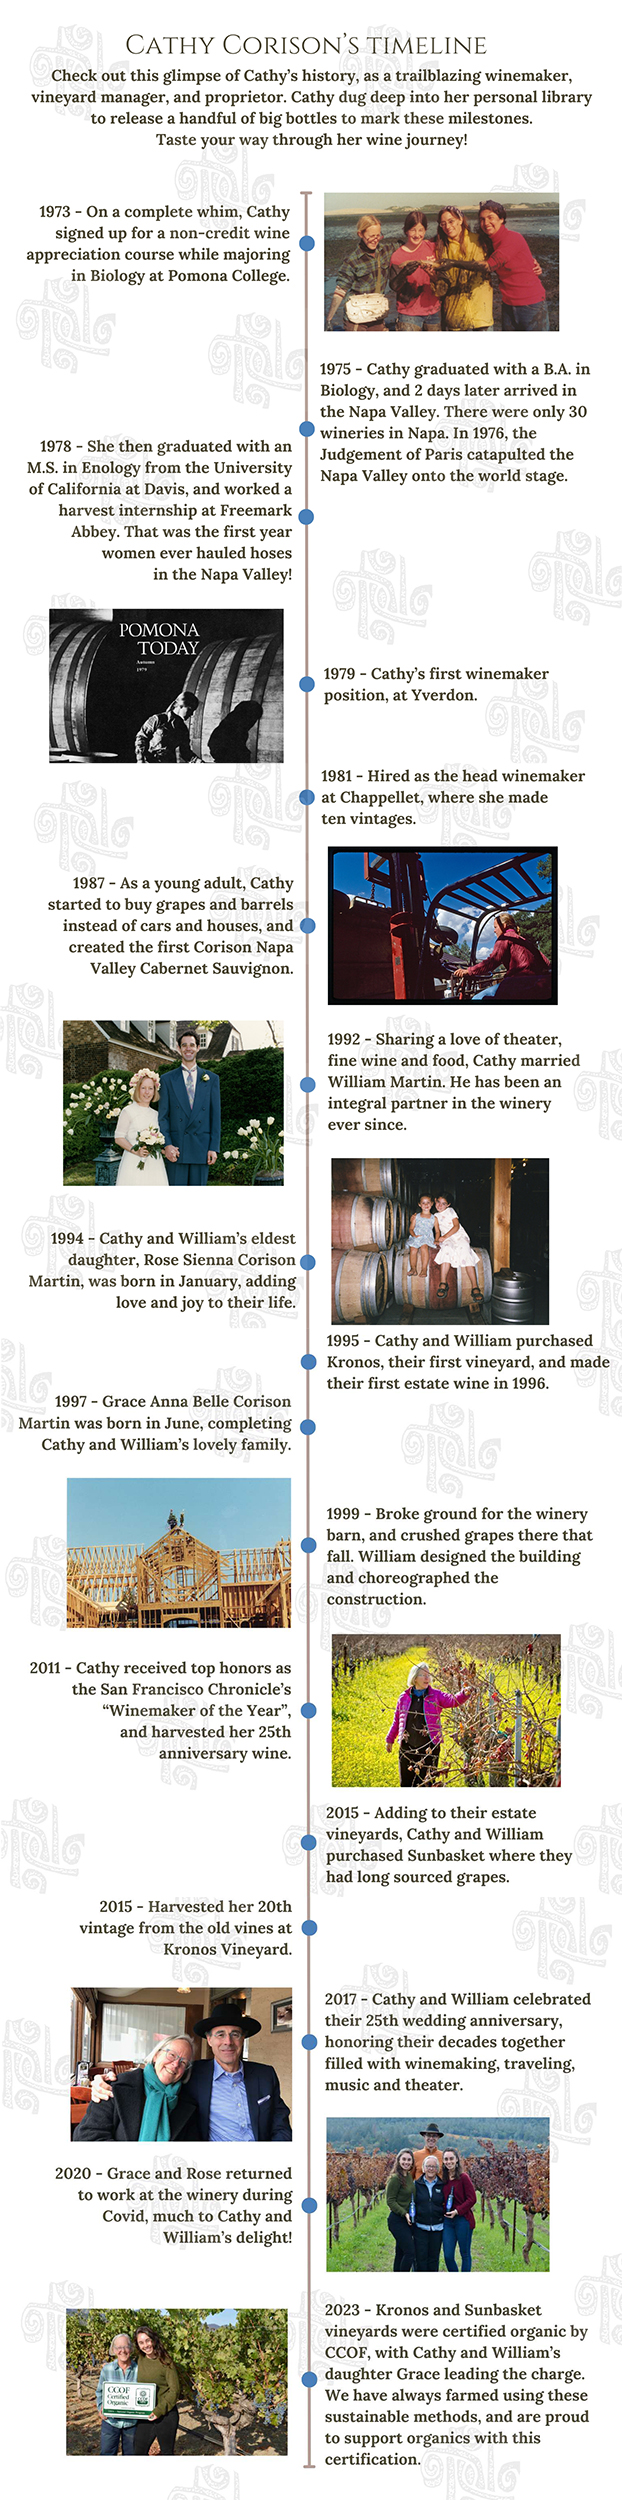 Cathy Corison's Timeline - Check out this glimpse of Cathy’s history, as a trailblazing winemaker, vineyard manager, and proprietor. Cathy dug deep into her personal library to release a handful of big bottles to mark these milestones. Taste your way through her wine journey! 1973 - On a complete whim, Cathy signed up for a non-credit wine appreciation course while majoring in Biology at Pomona College. 1975 - Cathy graduated with a B.A. in Biology, and 2 days later arrived in the Napa Valley. There were only 30 wineries in Napa. In 1976, the Judgement of Paris catapulted the Napa Valley onto the world stage. 1978 - She then graduated with an M.S. in Enology from the University of California at Davis, and worked a harvest internship at Freemark Abbey. That was the first year women ever hauled hoses in the Napa Valley! 1979 - Cathy’s first winemaker position, at Yverdon. 1981 - Hired as the head winemaker at Chappellet, where she made 10 vintages. 1987 - As a young adult, she started to buy grapes and barrels instead of cars and houses, and created the first Corison Napa Valley Cabernet Sauvignon. 1992 - Sharing a love of theater, fine wine and food, Cathy married William Martin. He has been an integral partner in the winery ever since. 1994 - Cathy and William’s eldest daughter, Rose Sienna Corison Martin, was born in January, adding love and joy to their life. 1995 - Cathy and William purchased Kronos Vineyard, their first vineyard, and made their first estate wine in 1996. 1997 - Grace Anna Belle Corison Martin was born in June, completing Cathy and William’s lovely family. 1999 - Broke ground for the winery barn, and crushed grapes there that fall. William designed and choreographed the construction. 2011 - Cathy received top honors as the San Francisco Chronicle’s “Winemaker of the Year”, and harvested her 25th anniversary wine. 2015 - Adding to their estate vineyards, Cathy and William purchased Sunbasket Vineyard where they had long sourced grapes. 2015 - Harvested her 20th vintage from the old vines at Kronos Vineyard. 2017 - Cathy and William celebrated their 25th wedding anniversary, honoring their decades together filled with winemaking, traveling, music and theater. 2020 - Grace and Rose returned to work at the winery during Covid, much to Cathy and William’s delight! 2023 - Kronos and Sunbasket vineyards were certified organic by CCOF, with Cathy and William’s daughter Grace leading the charge. We have always farmed using these sustainable methods, and are proud to support organics with this certification.